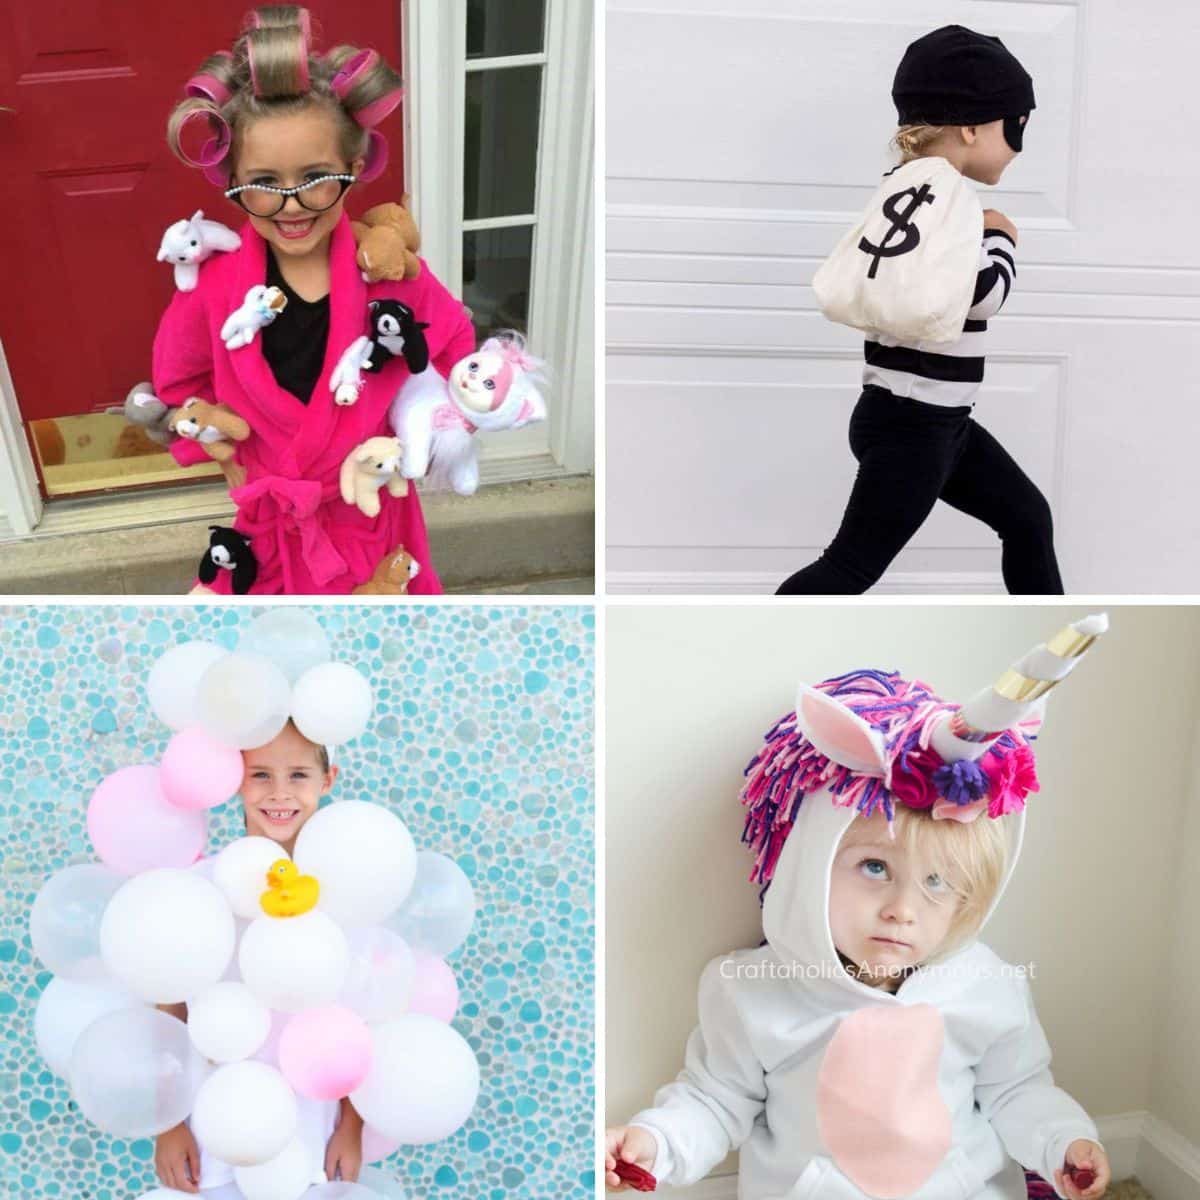 4 images of diy halloween costumes for kids.